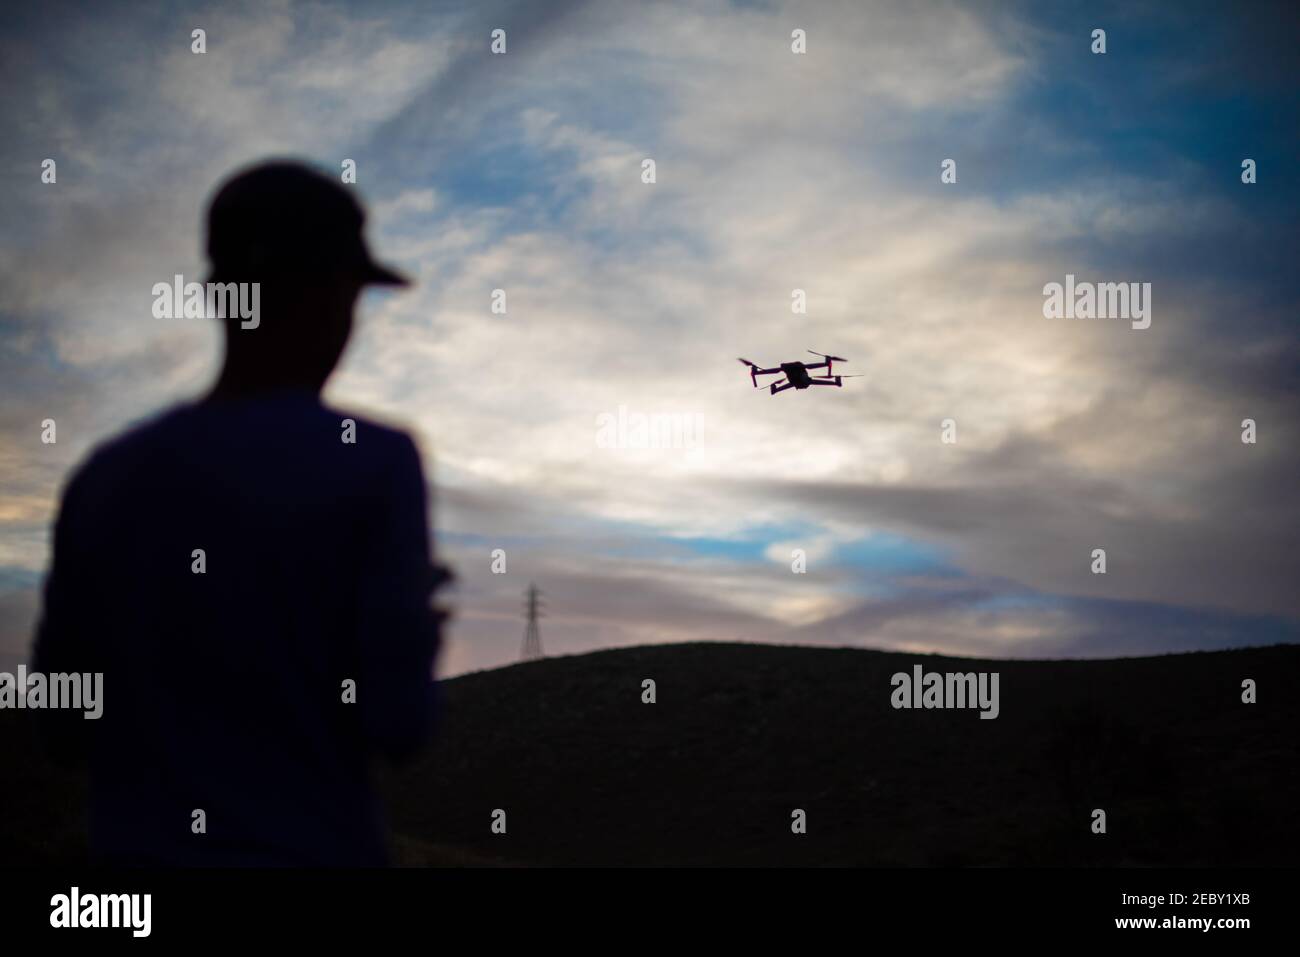 Drone seen flying during sunset with silhoutte of pilot Stock Photo